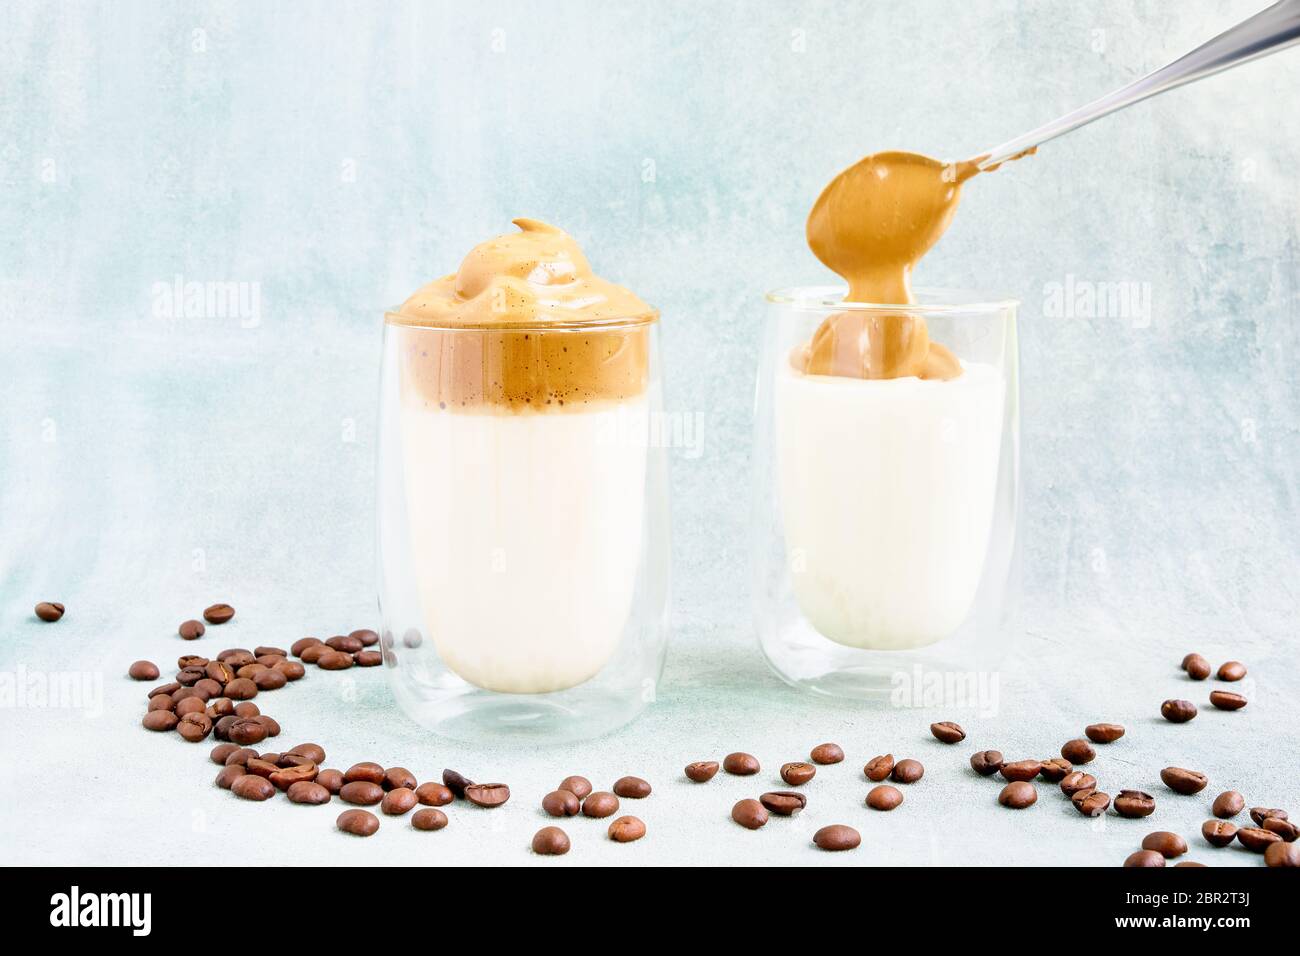 Trendy homemade Dalgona coffee in glass on blue background. Recipe of popular Korean drink latte with foam of instant coffee. DIY, instruction. Stock Photo